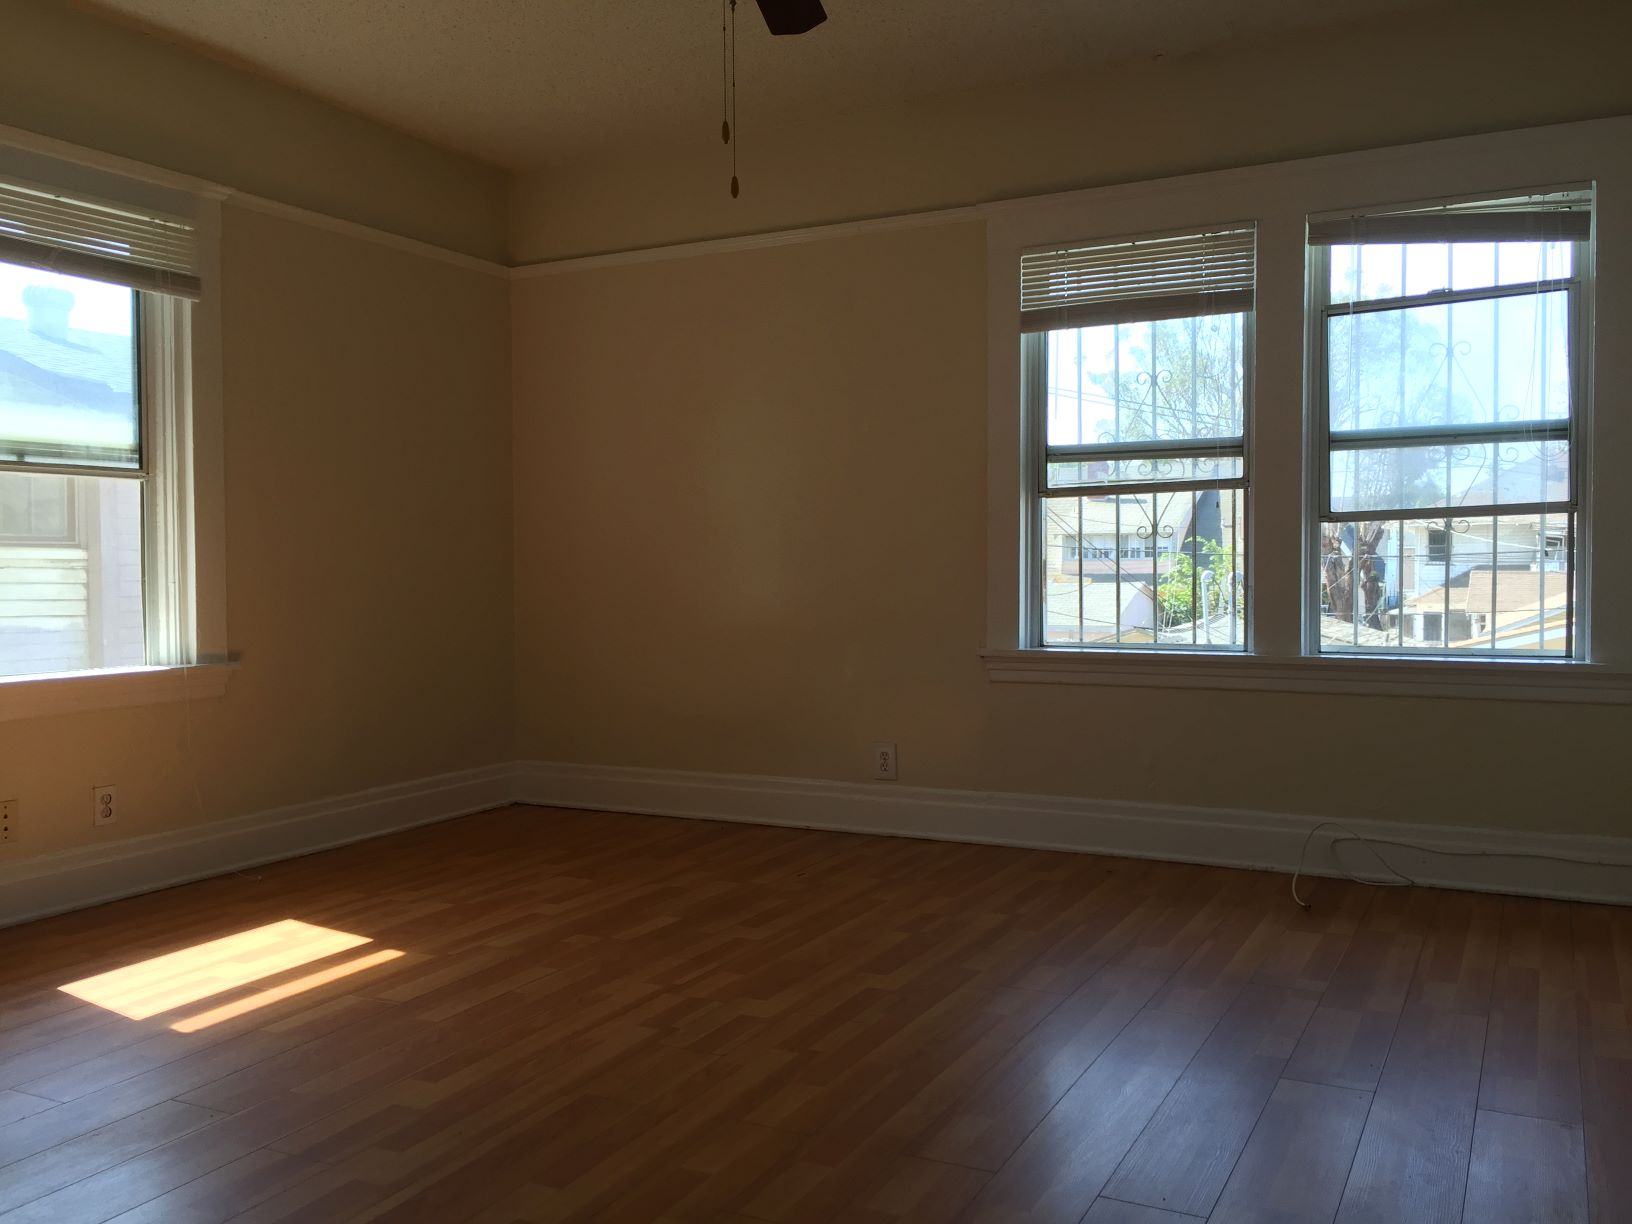 1176 W. 37th St., Los Angeles, California, ,1 BathroomBathrooms,Apartment,For Rent,W. 37th St.,1034